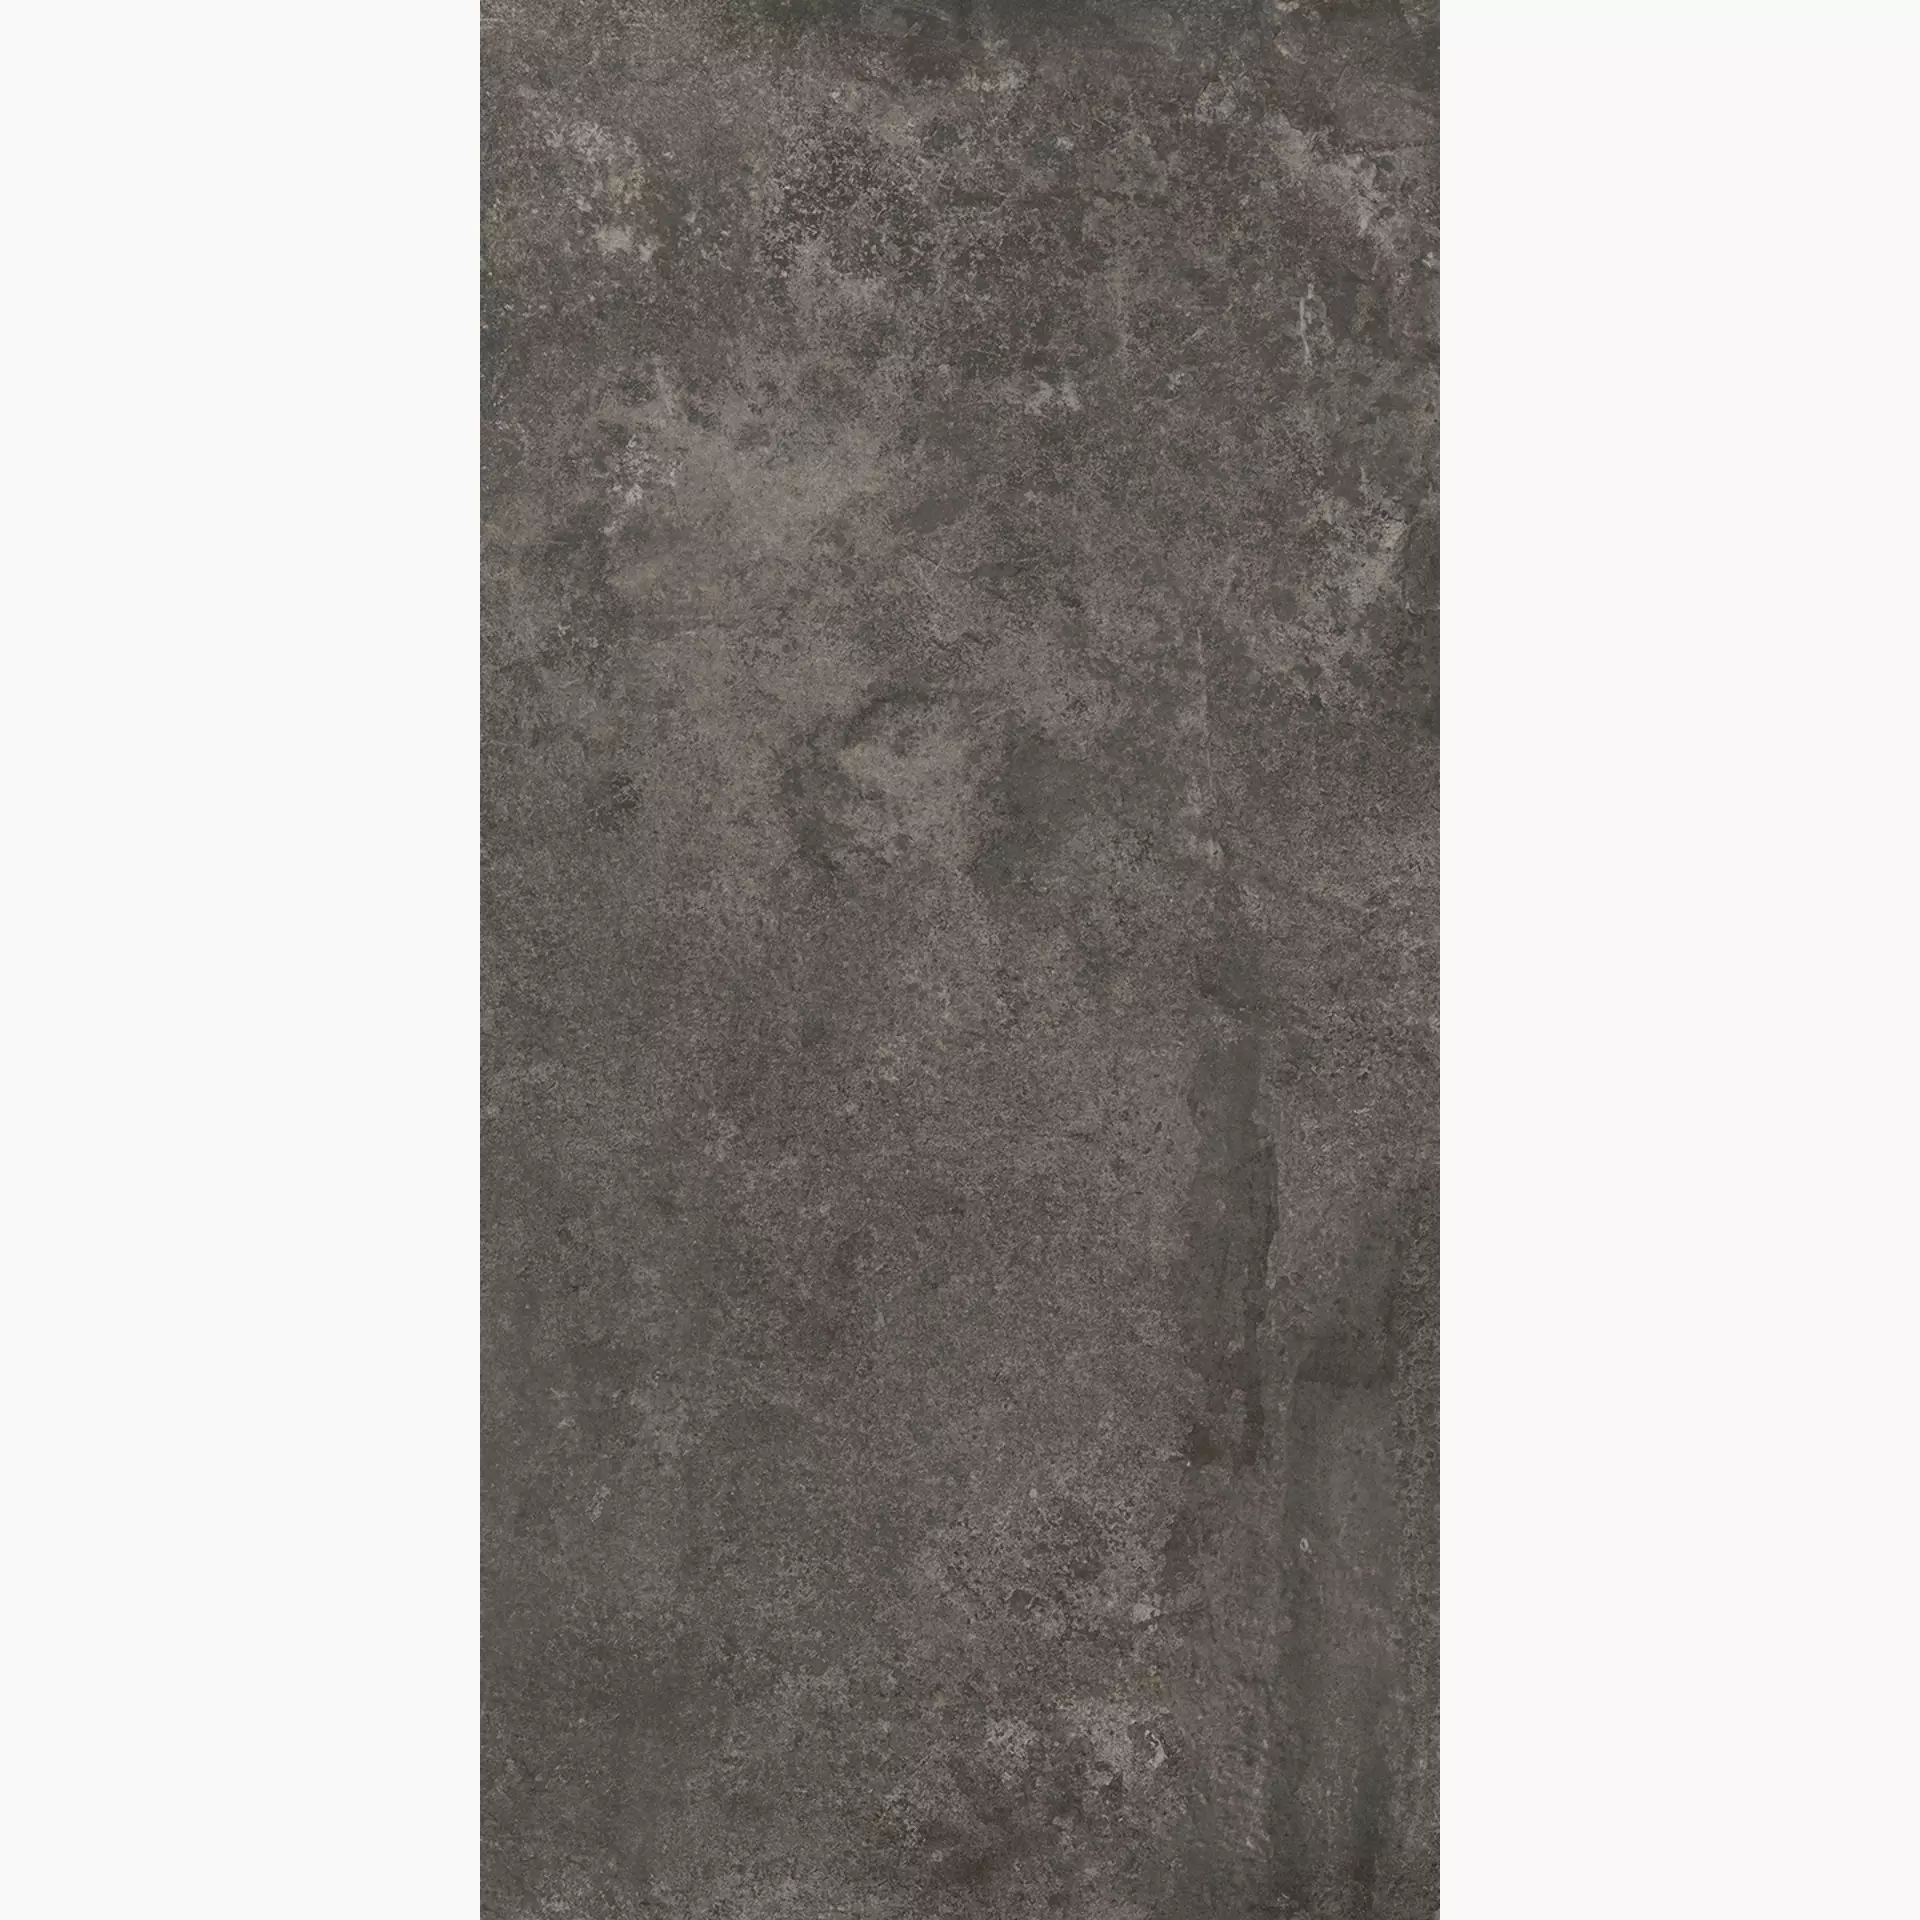 Fondovalle Reframe Graphite Natural REF091 60x120cm rectified 8,5mm